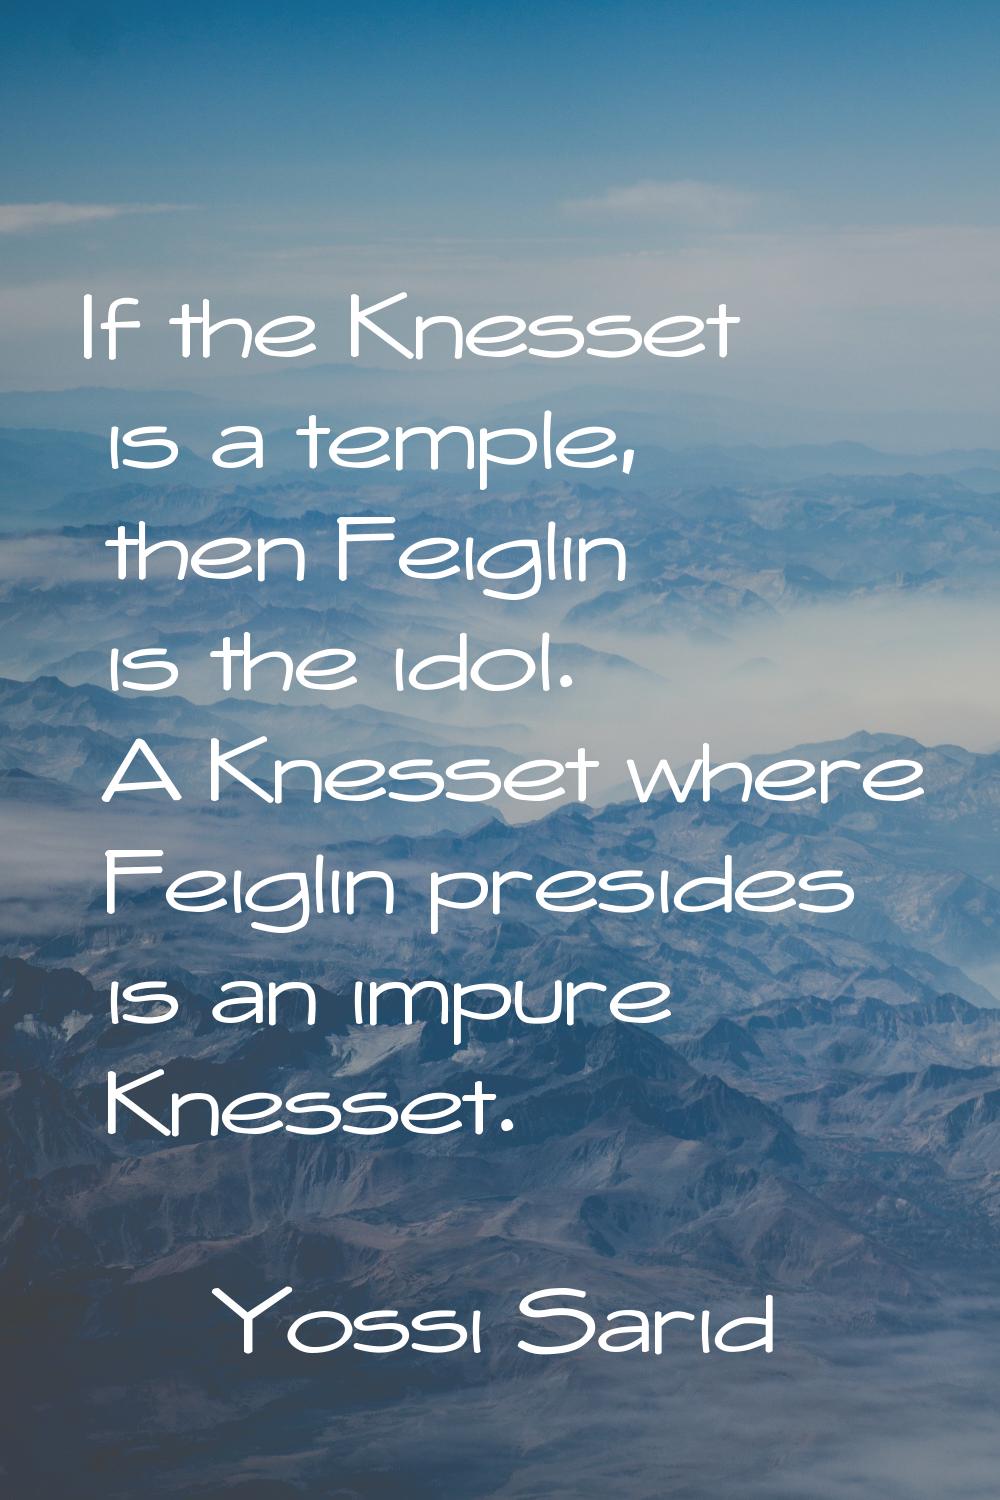 If the Knesset is a temple, then Feiglin is the idol. A Knesset where Feiglin presides is an impure